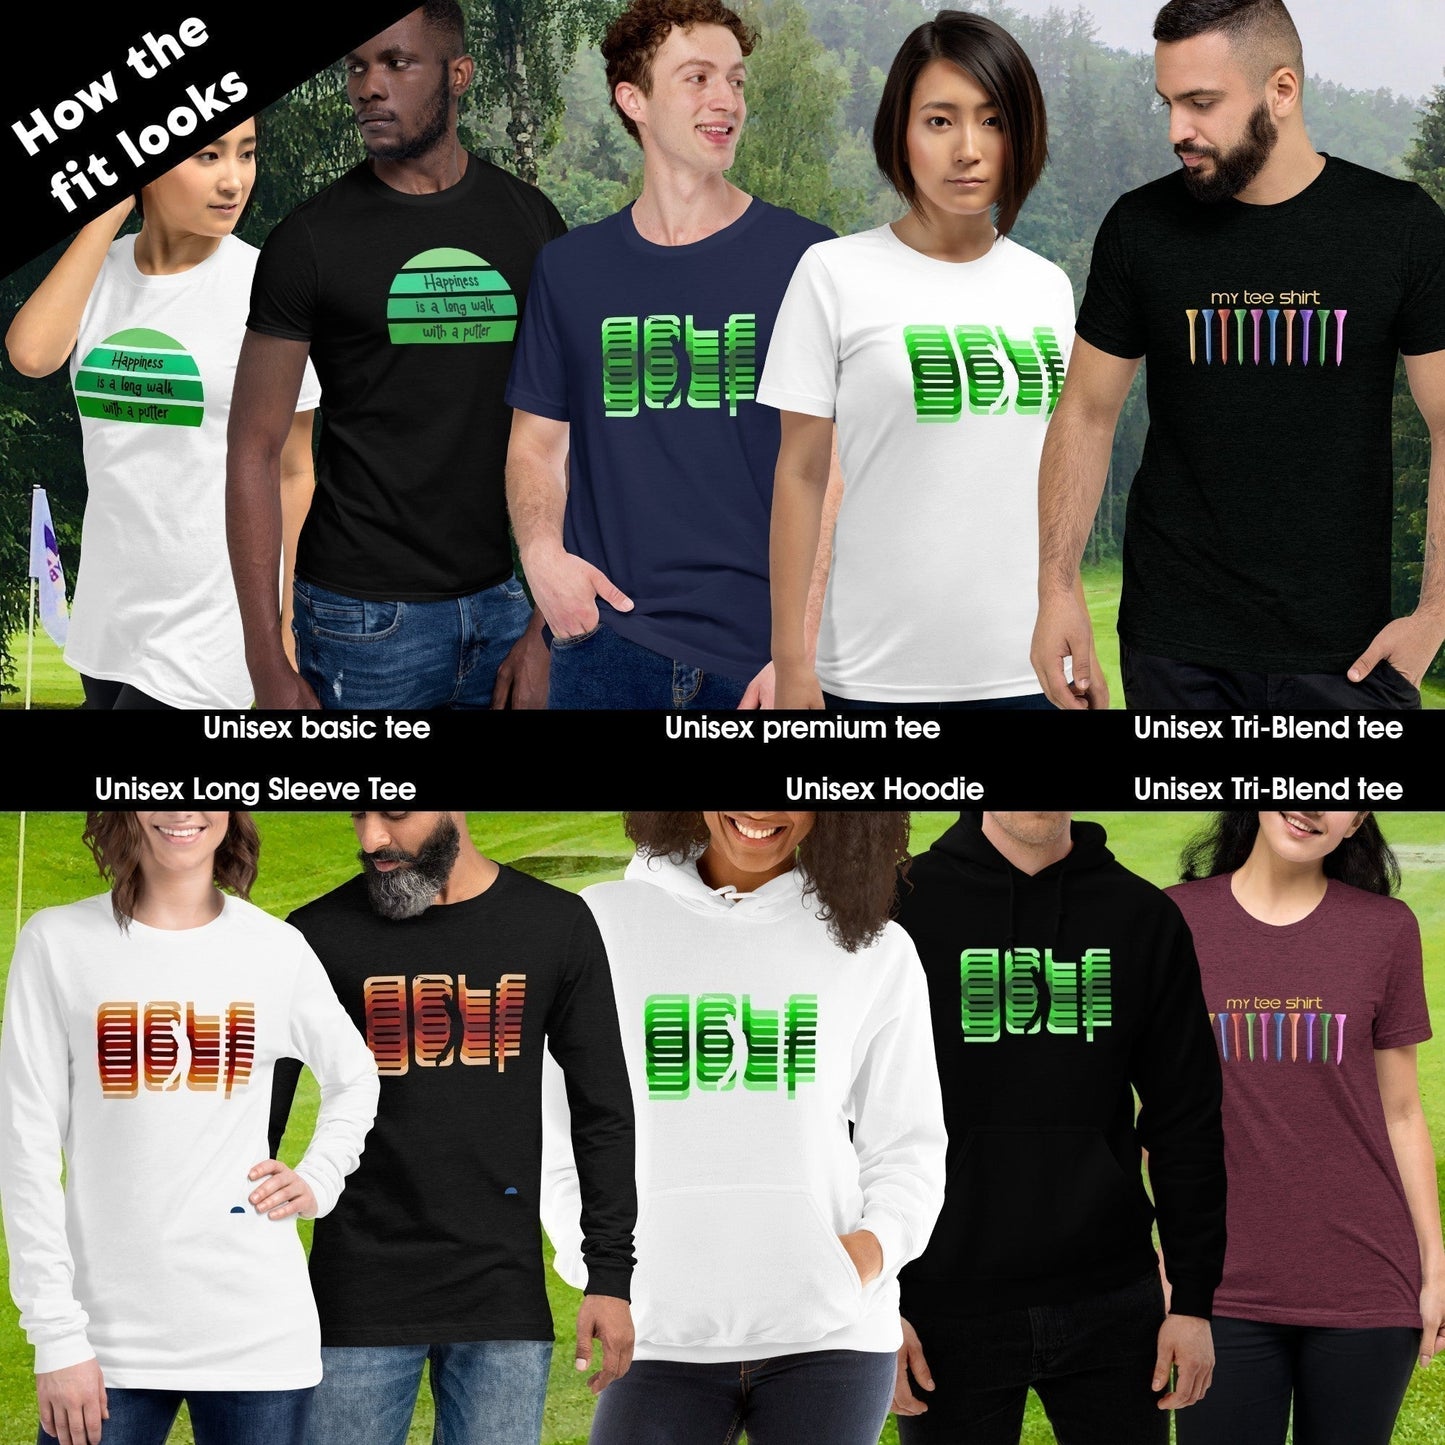 Wild about Golf TShirt and Hoodie is a Creative Golf Graphic design for Men and Women